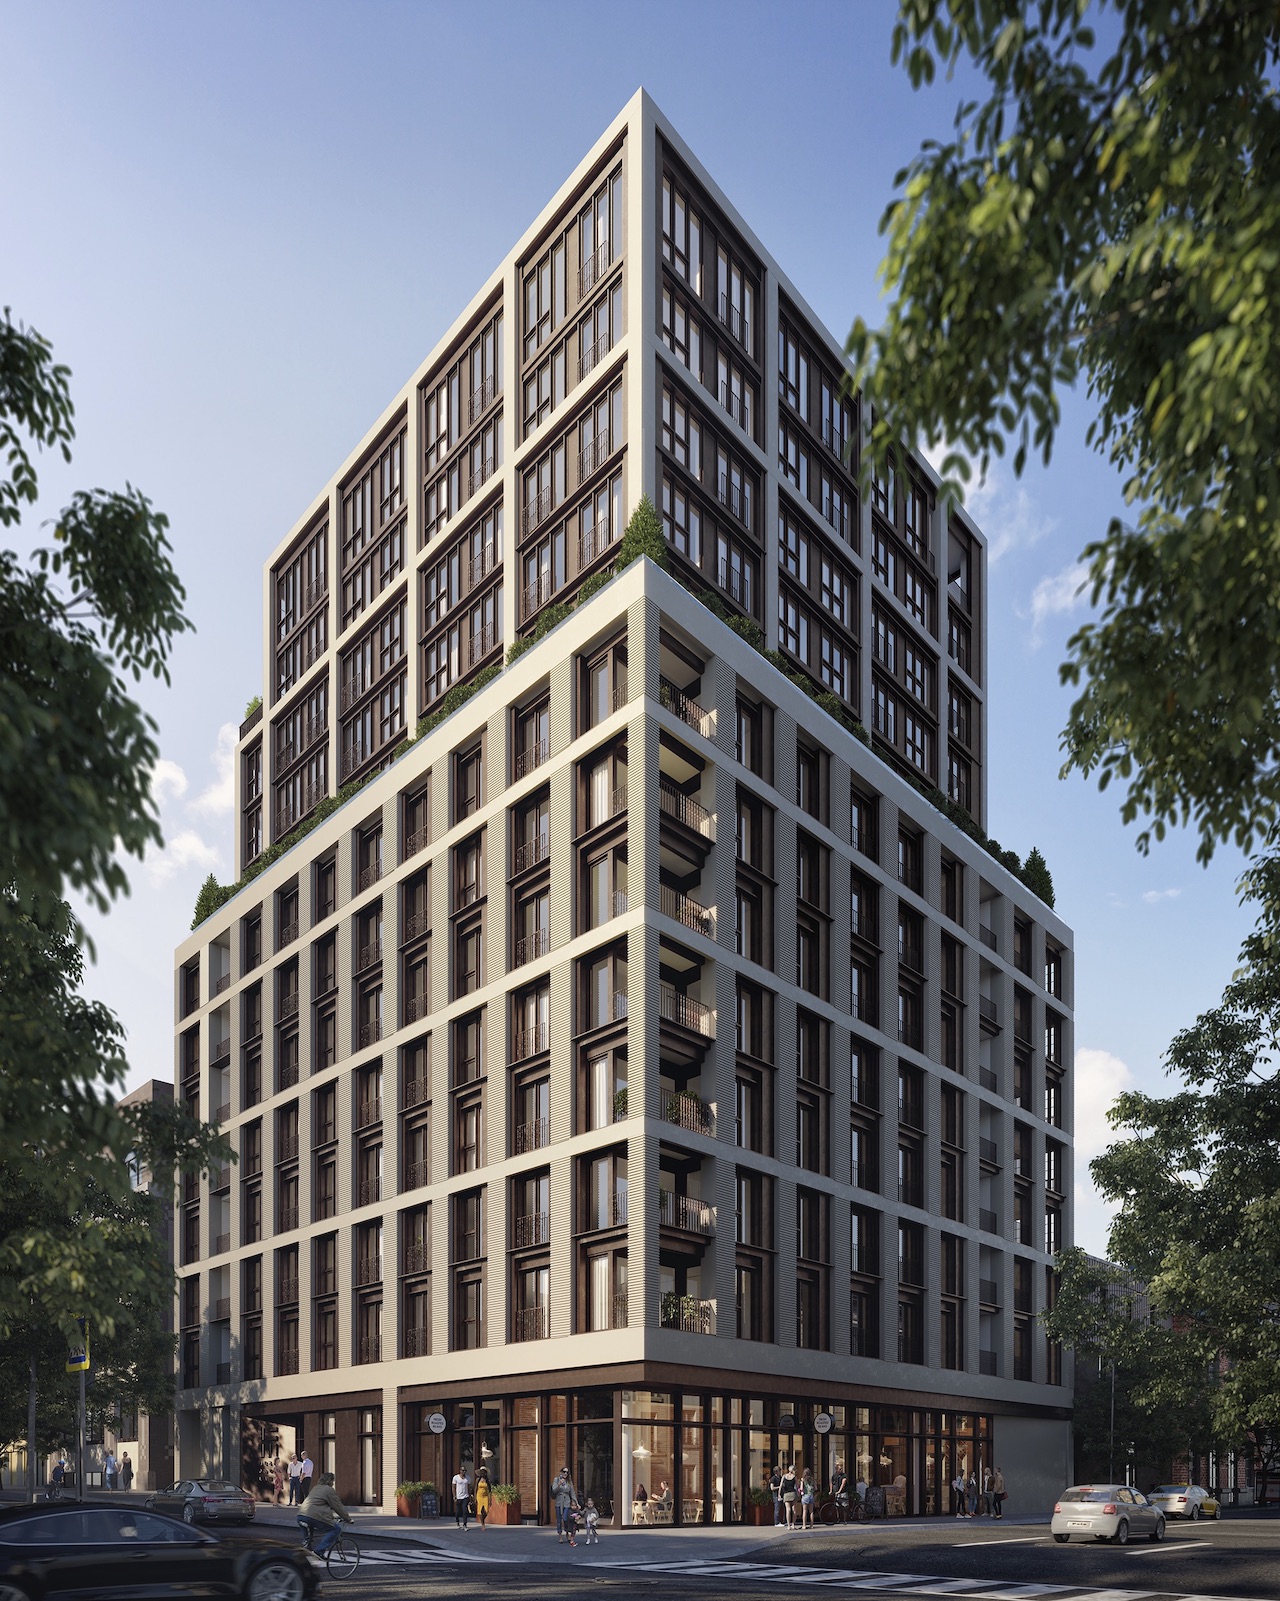 Full exterior rendering of 123 Portland condos during the day.